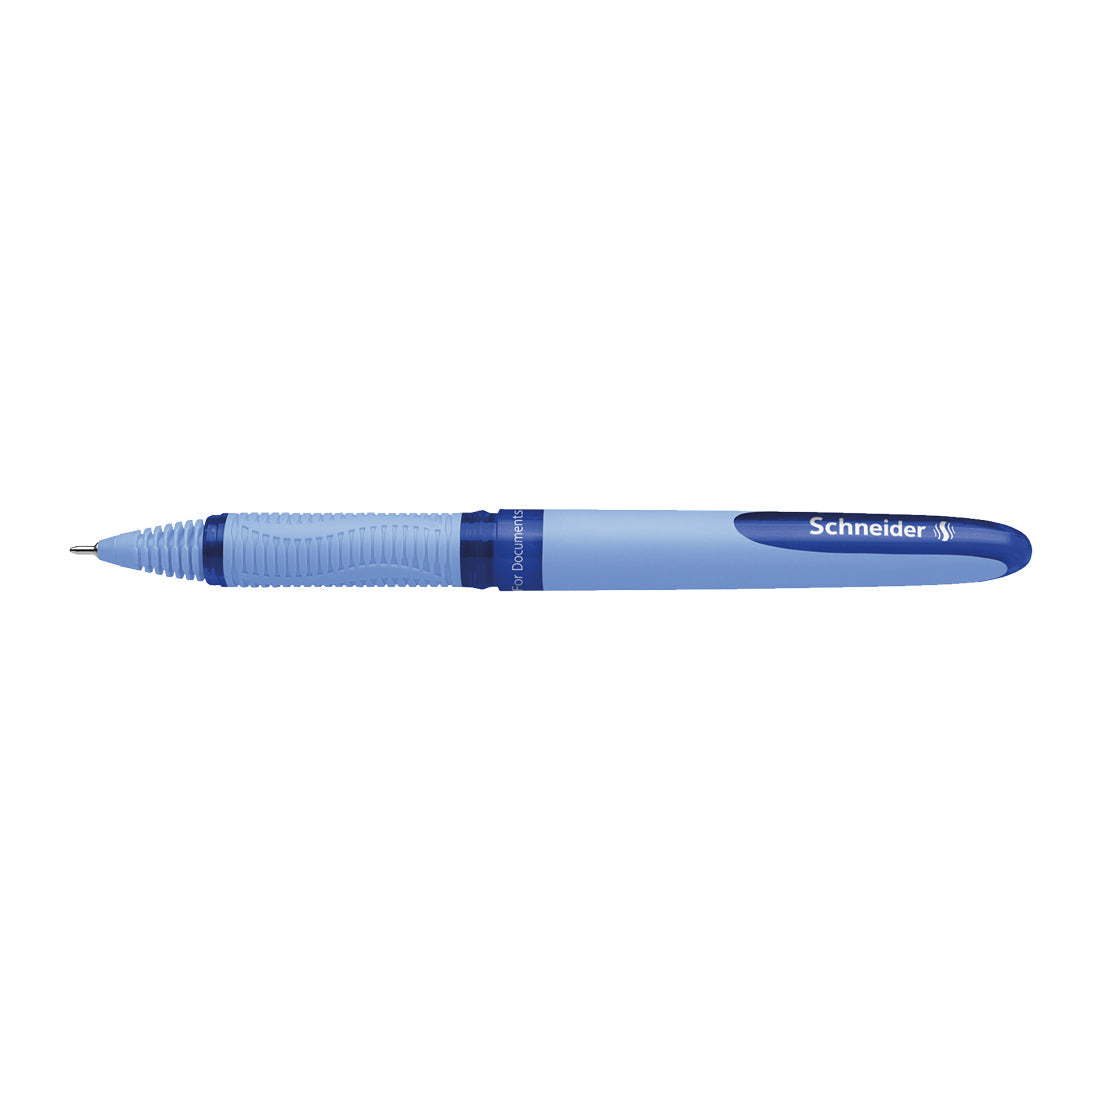 One Hybrid N Rollerball 0.3mm, Box of 10#ink-colour_blue